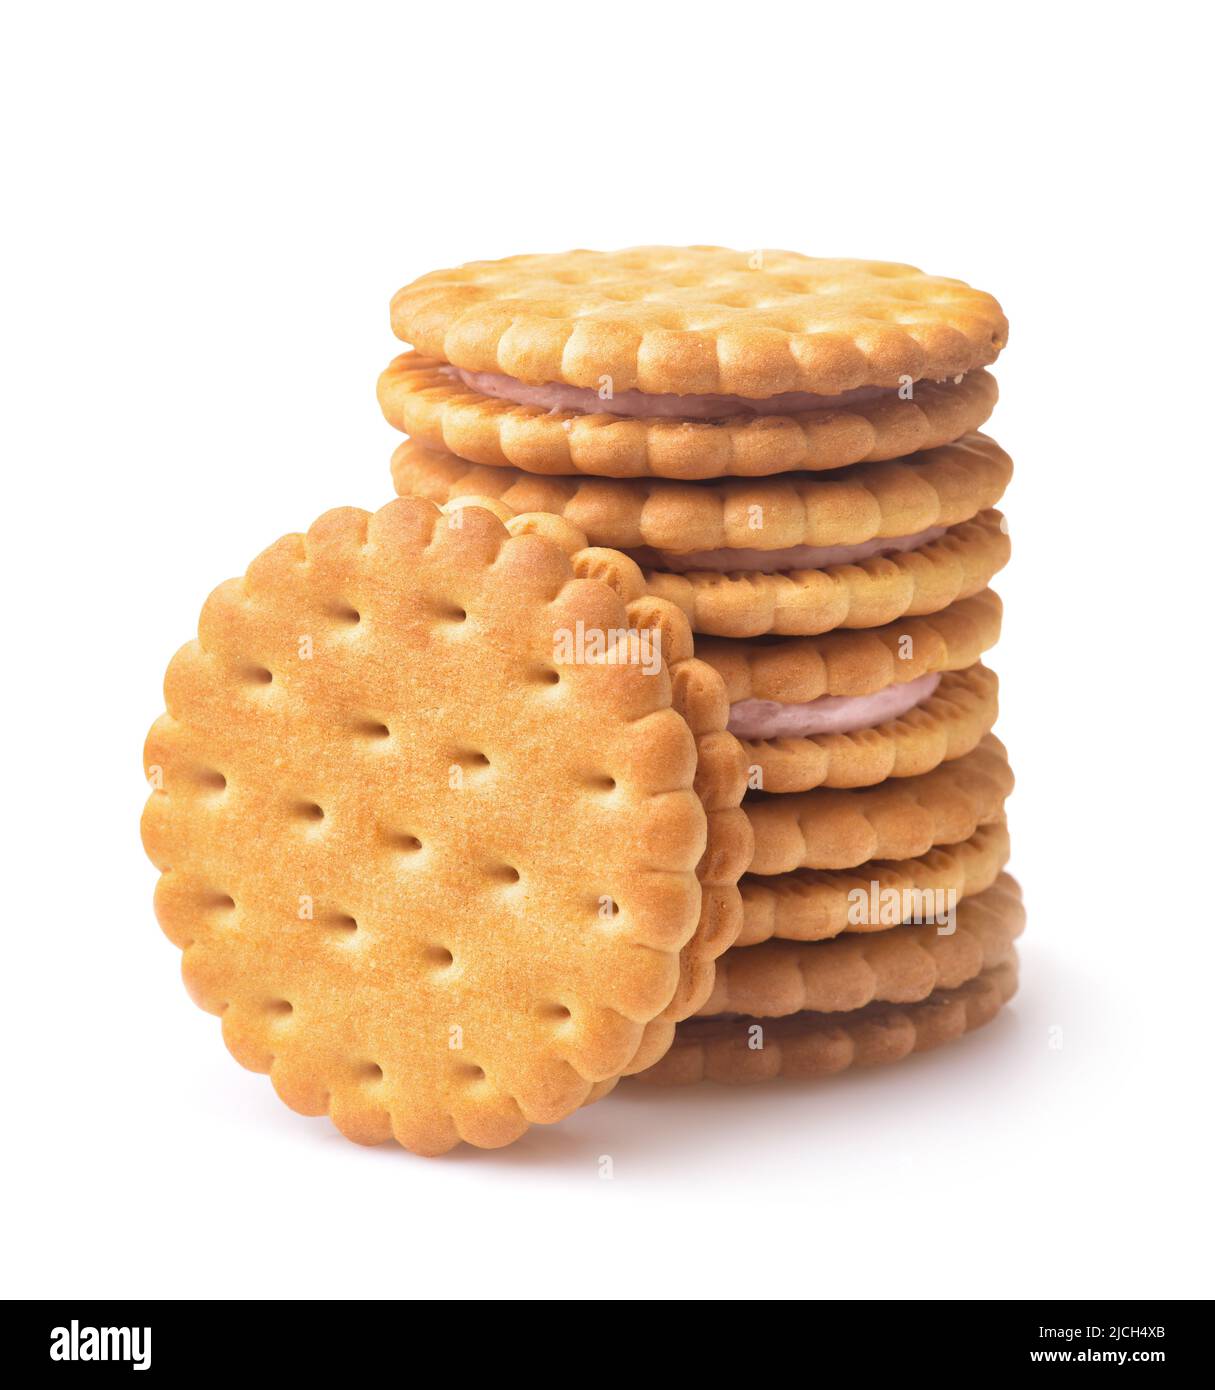 Stack of sandwich biscuits with fruit filling isolated on white Stock Photo